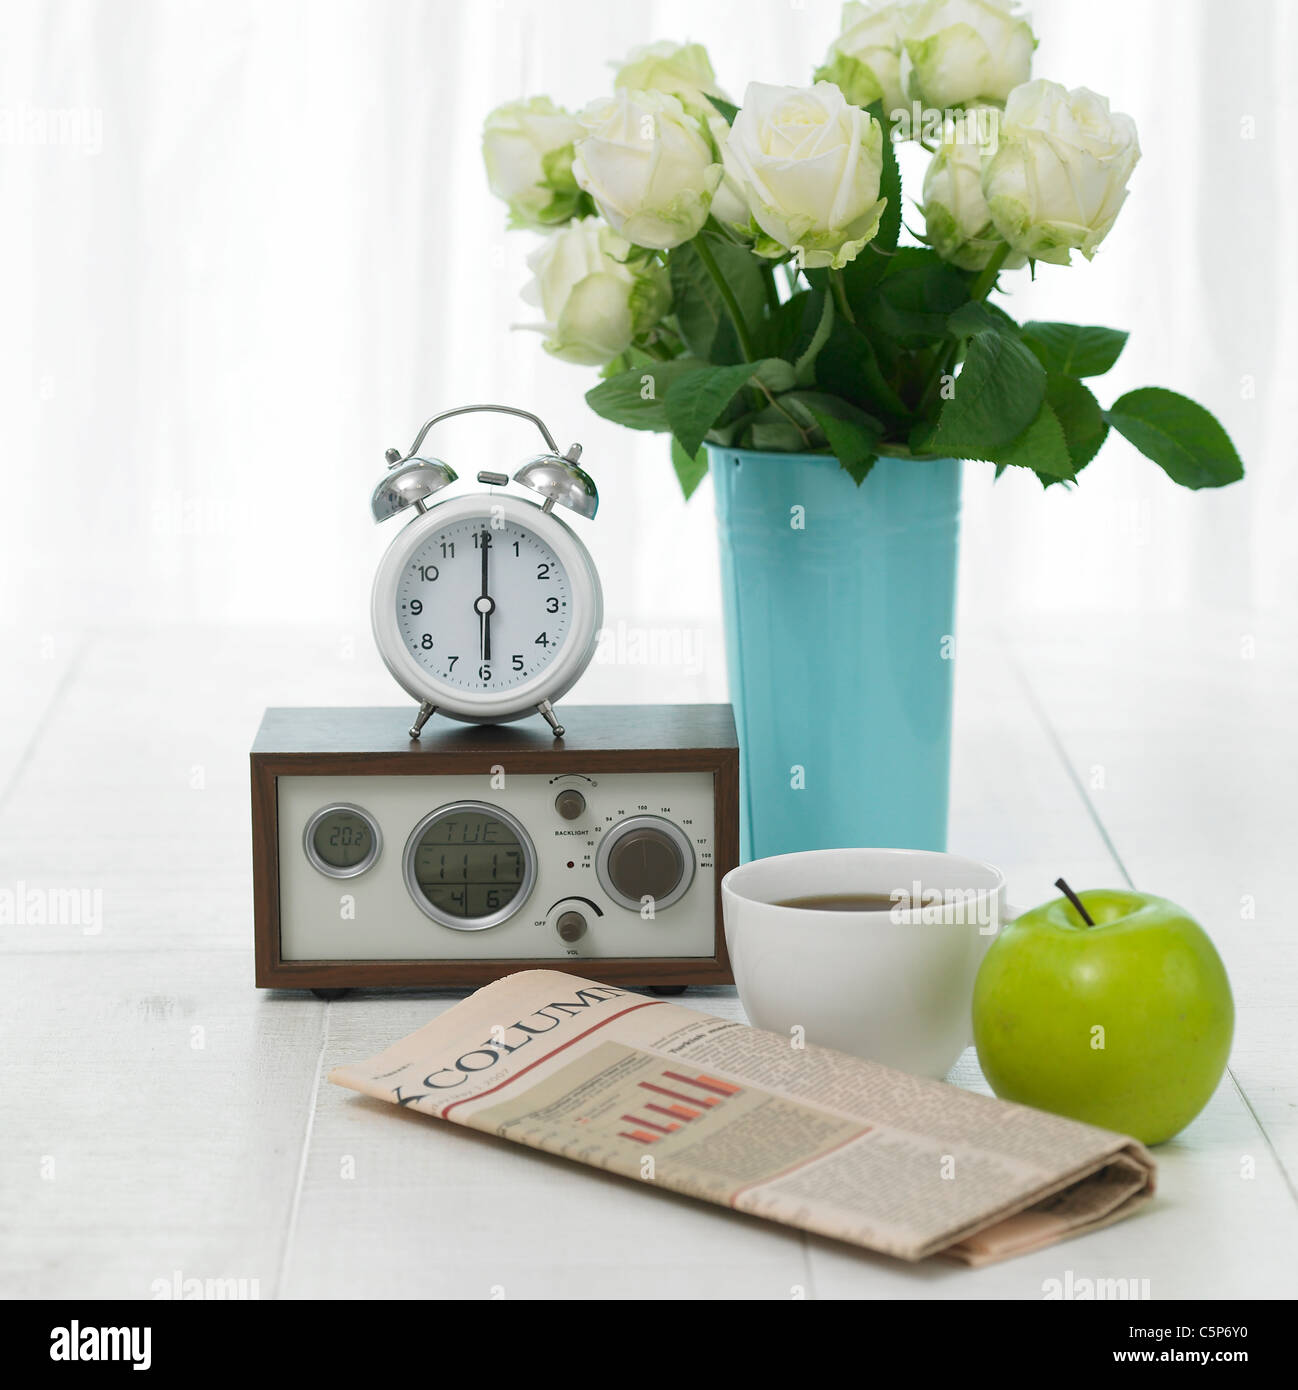 Flower vase and other objects Stock Photo